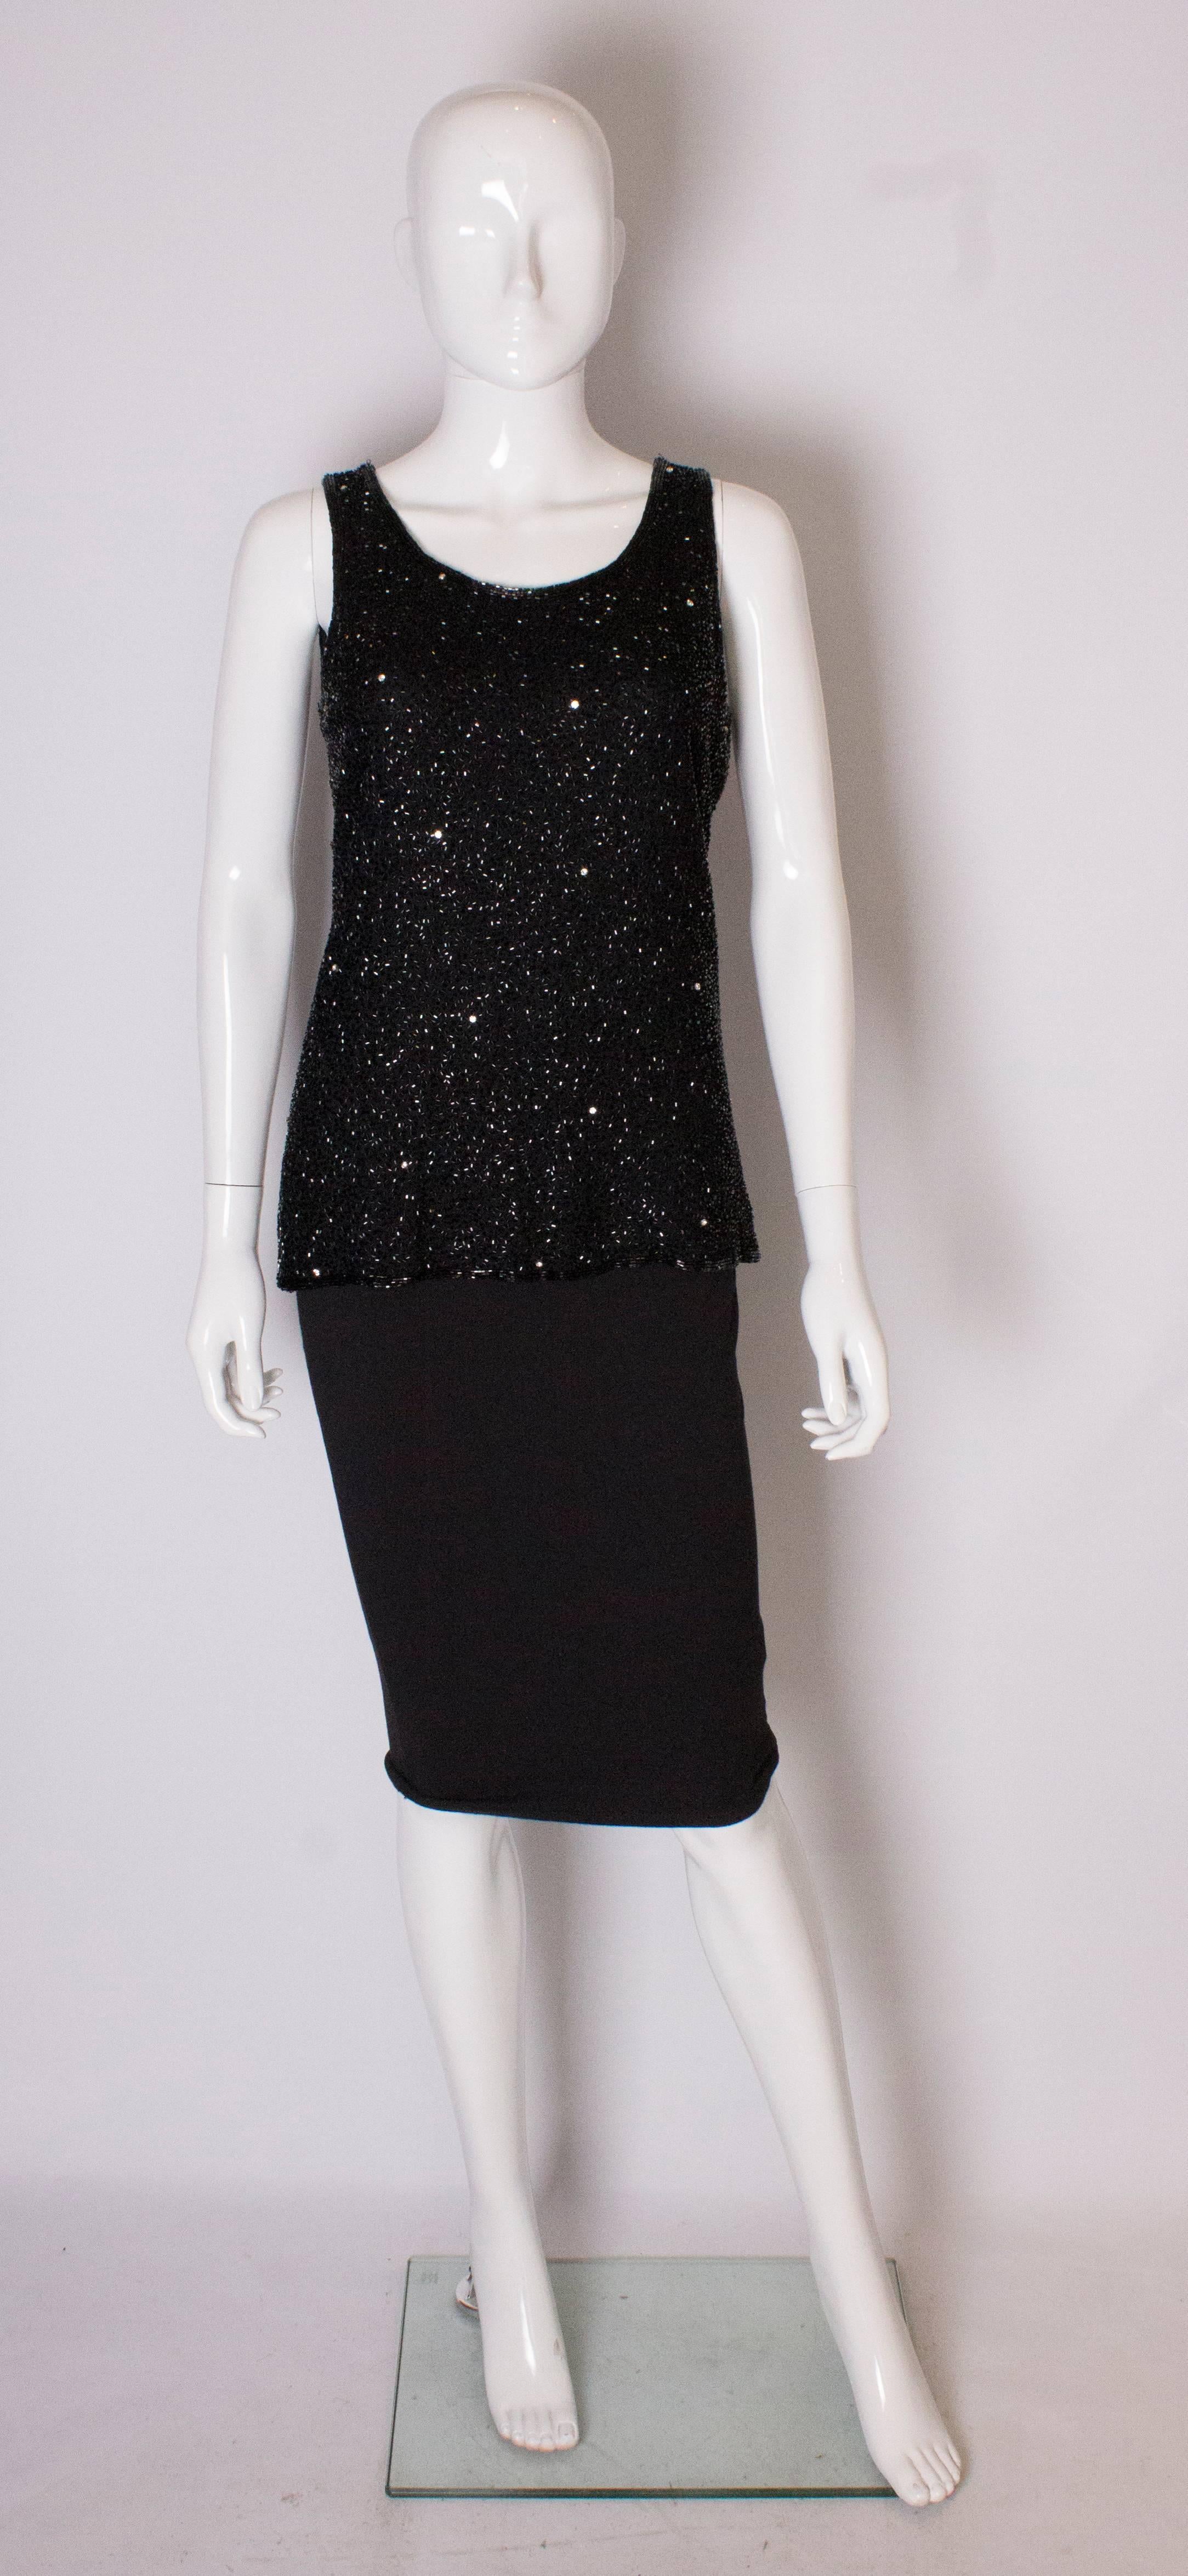 A chic vinttage  top by Tomasz Starzewski. The top has a scoop necklline and is sleaveless. It is covered with black beads and diamante stones .It has a central back zip, is fully lined and has 4'' slits on either side..